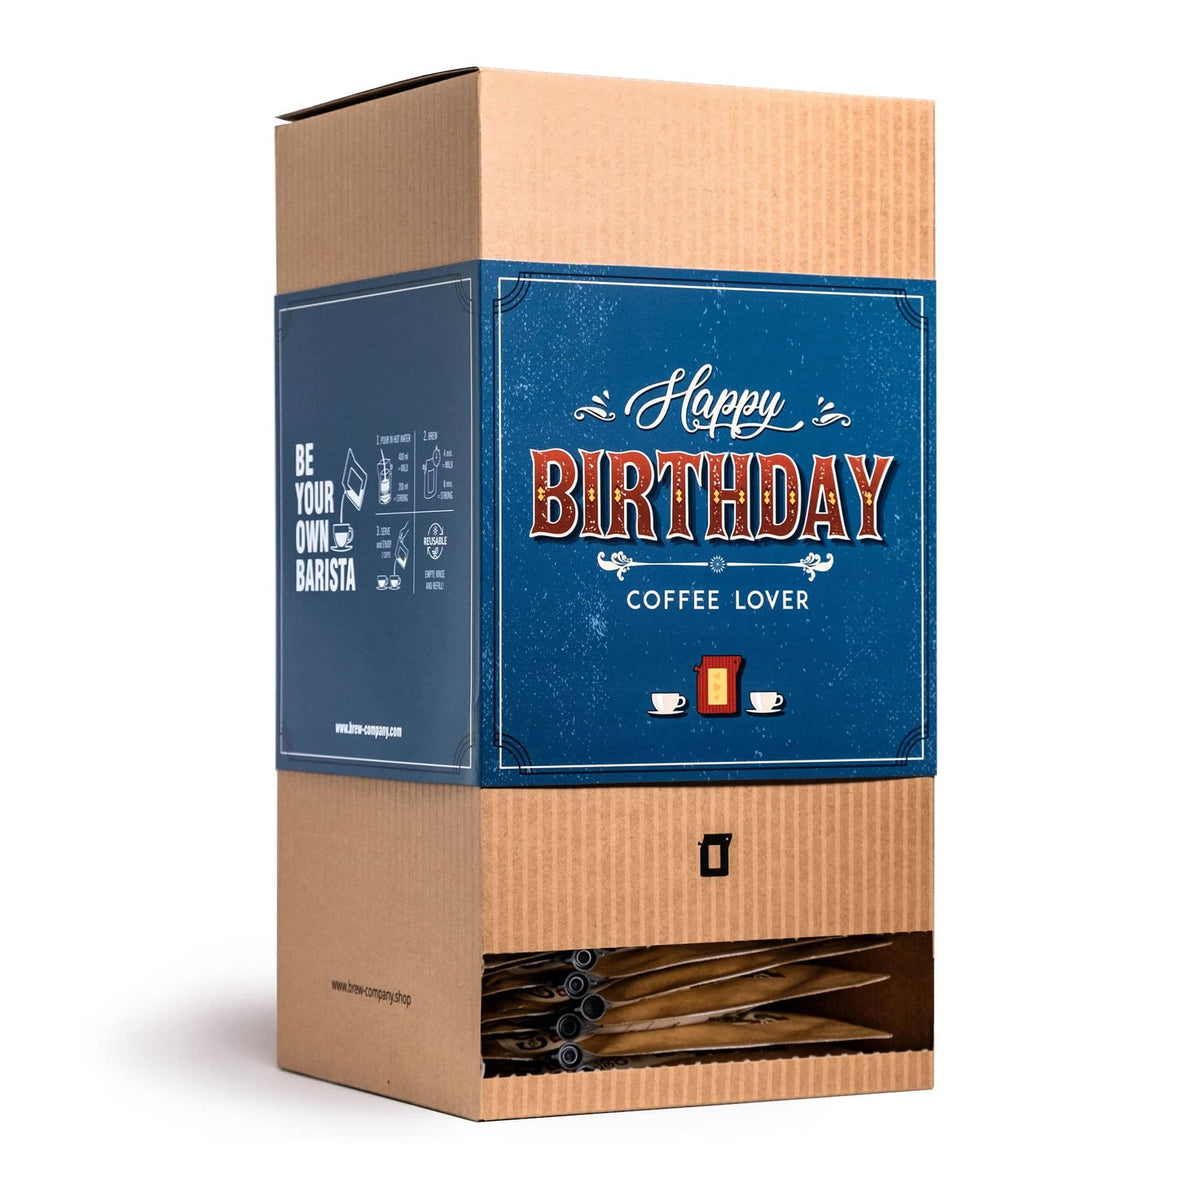 HAPPY BIRTHDAY COFFEE GIFT BOX - Gift Boxes | The Brew Company